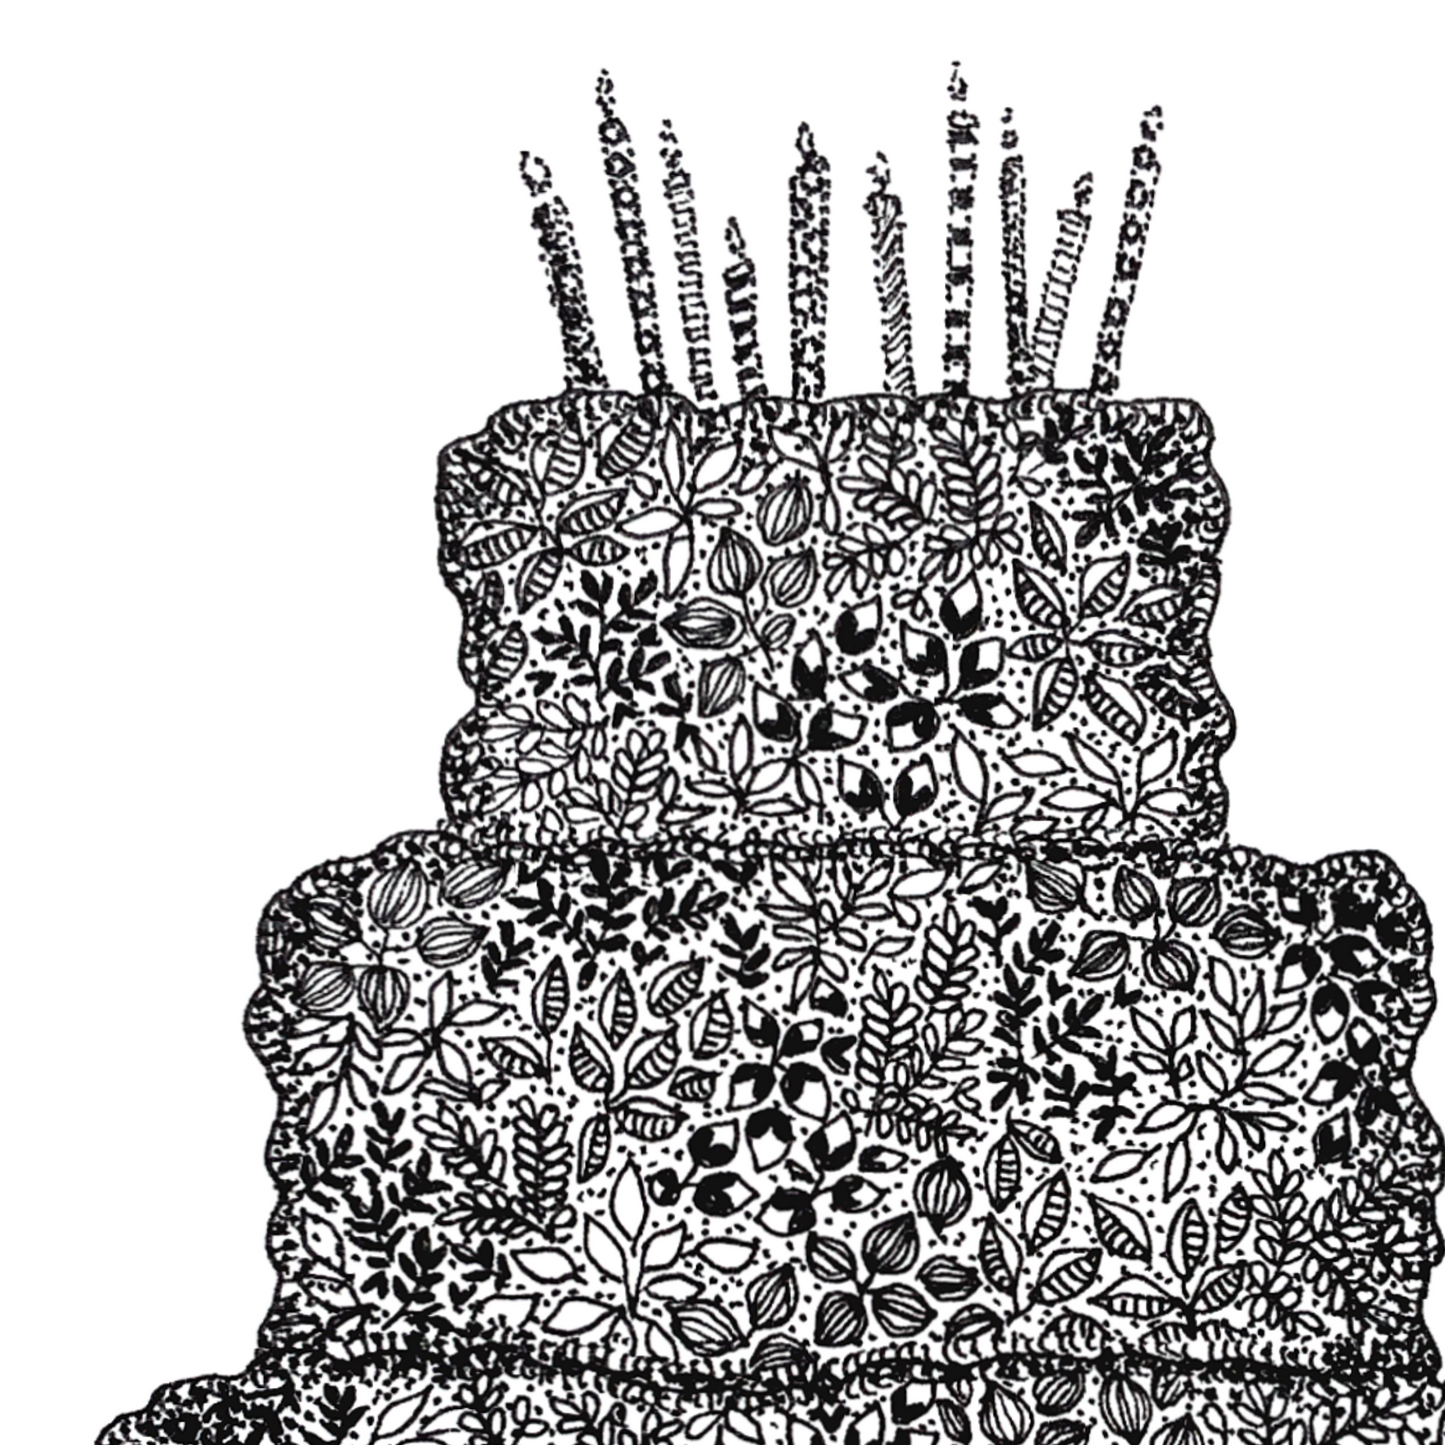 Image shows top two tiers of a birthday cake. 10 candles on top of the cake and great detail to be seen. 